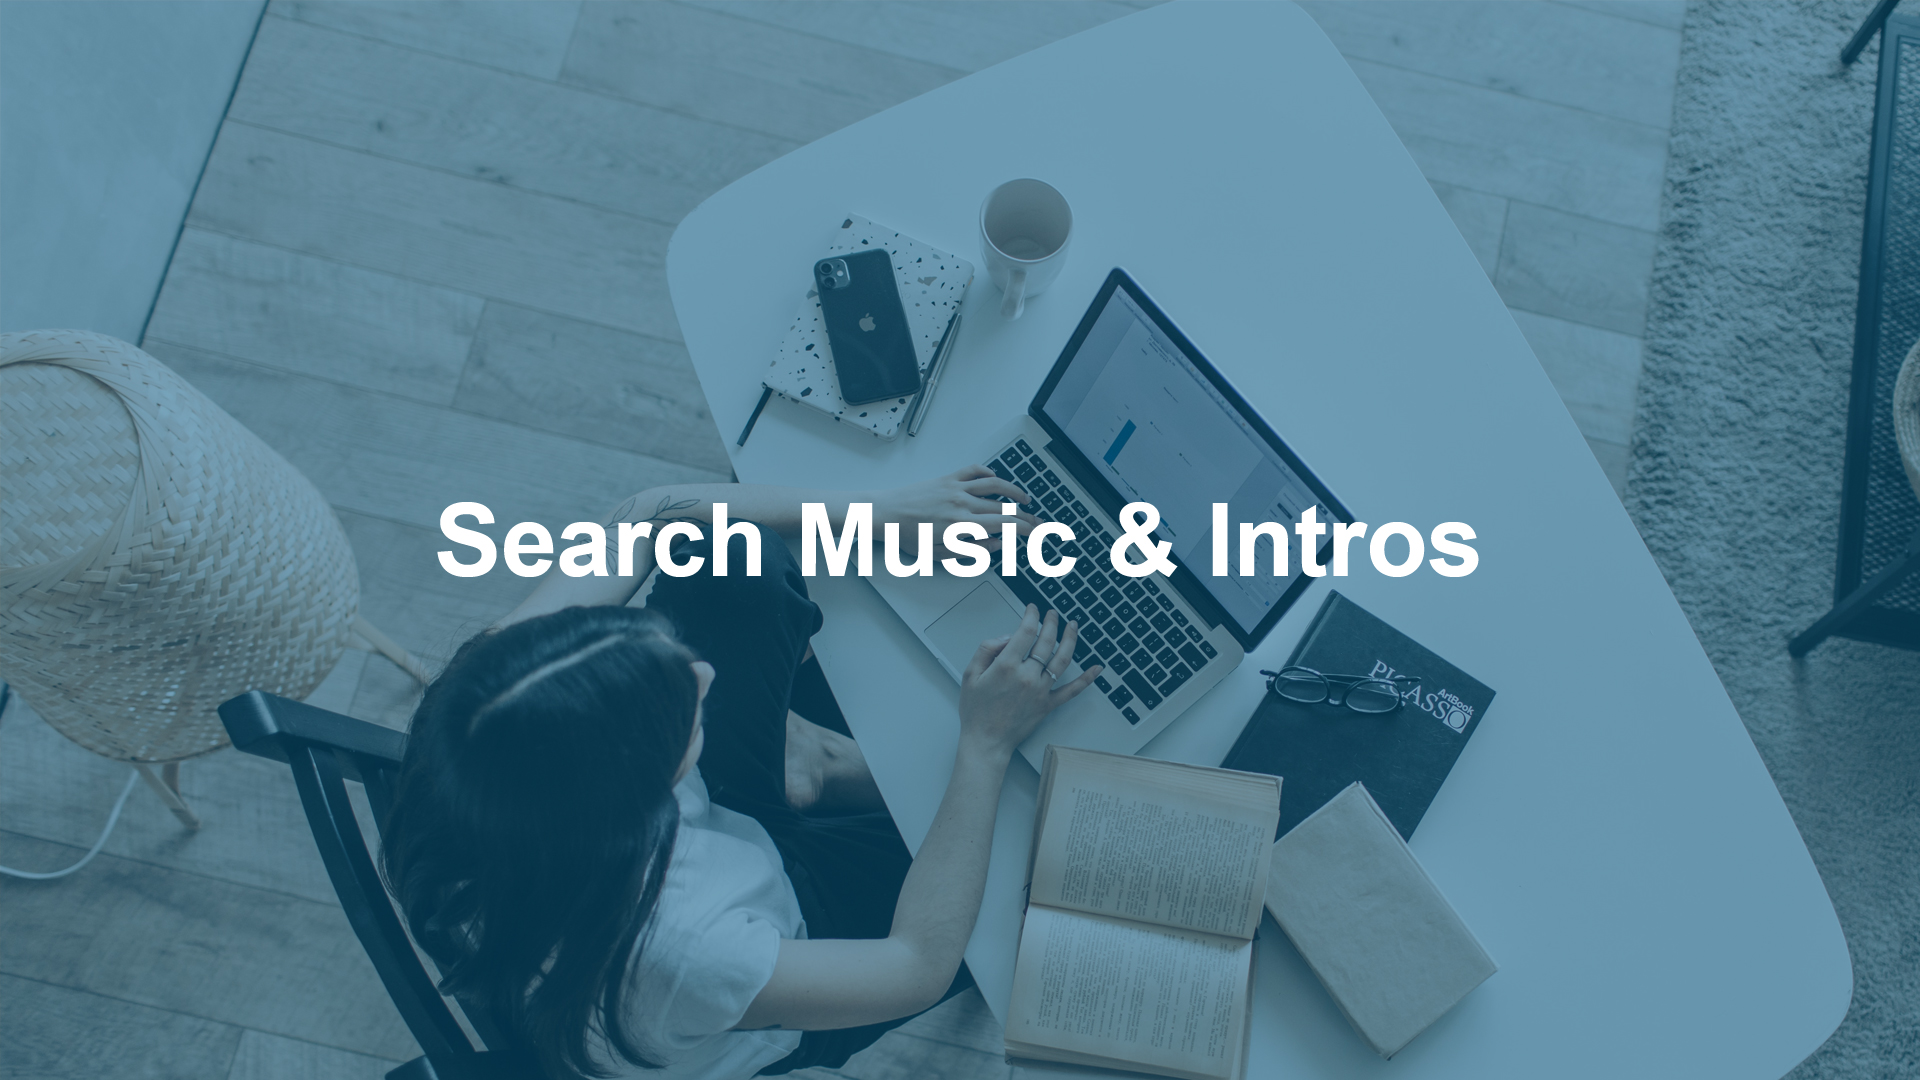 Search Music & Intros